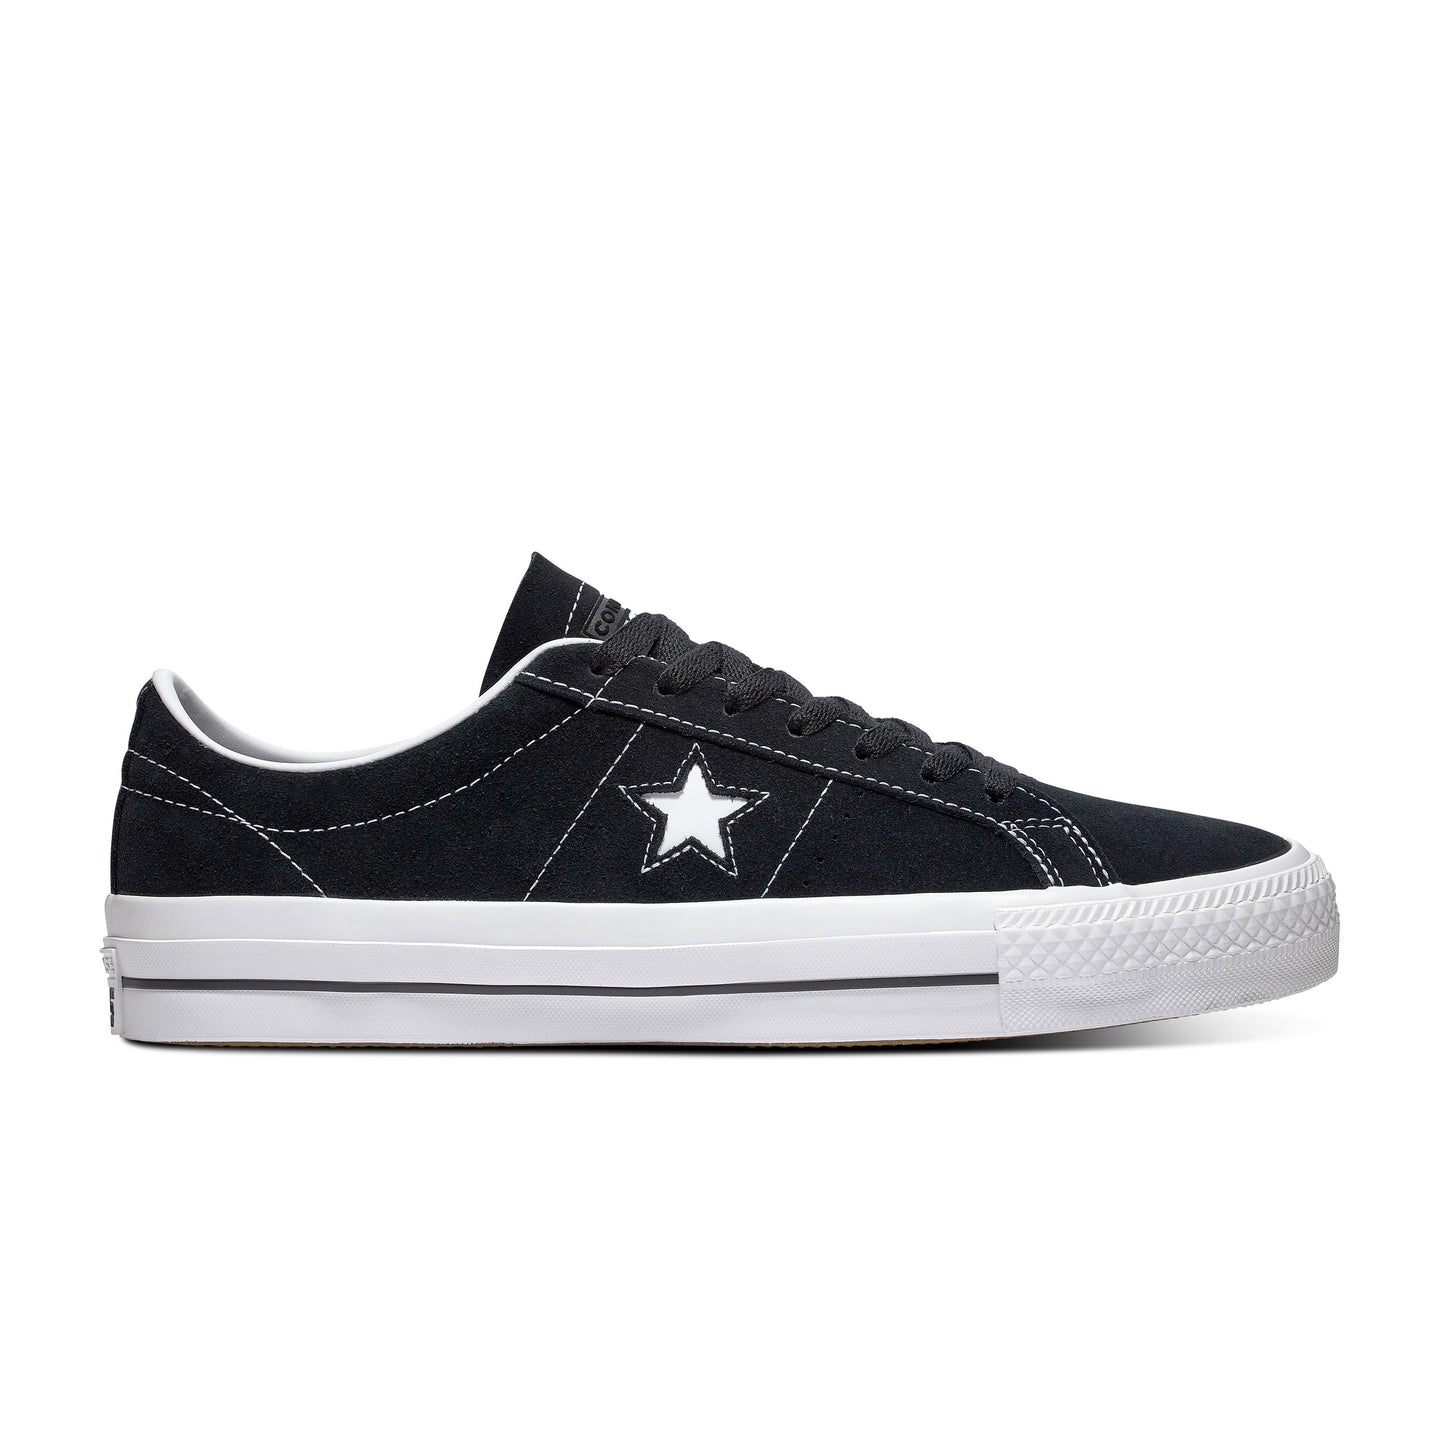 CONVERSE CONS - One Star Pro Ox Black/White